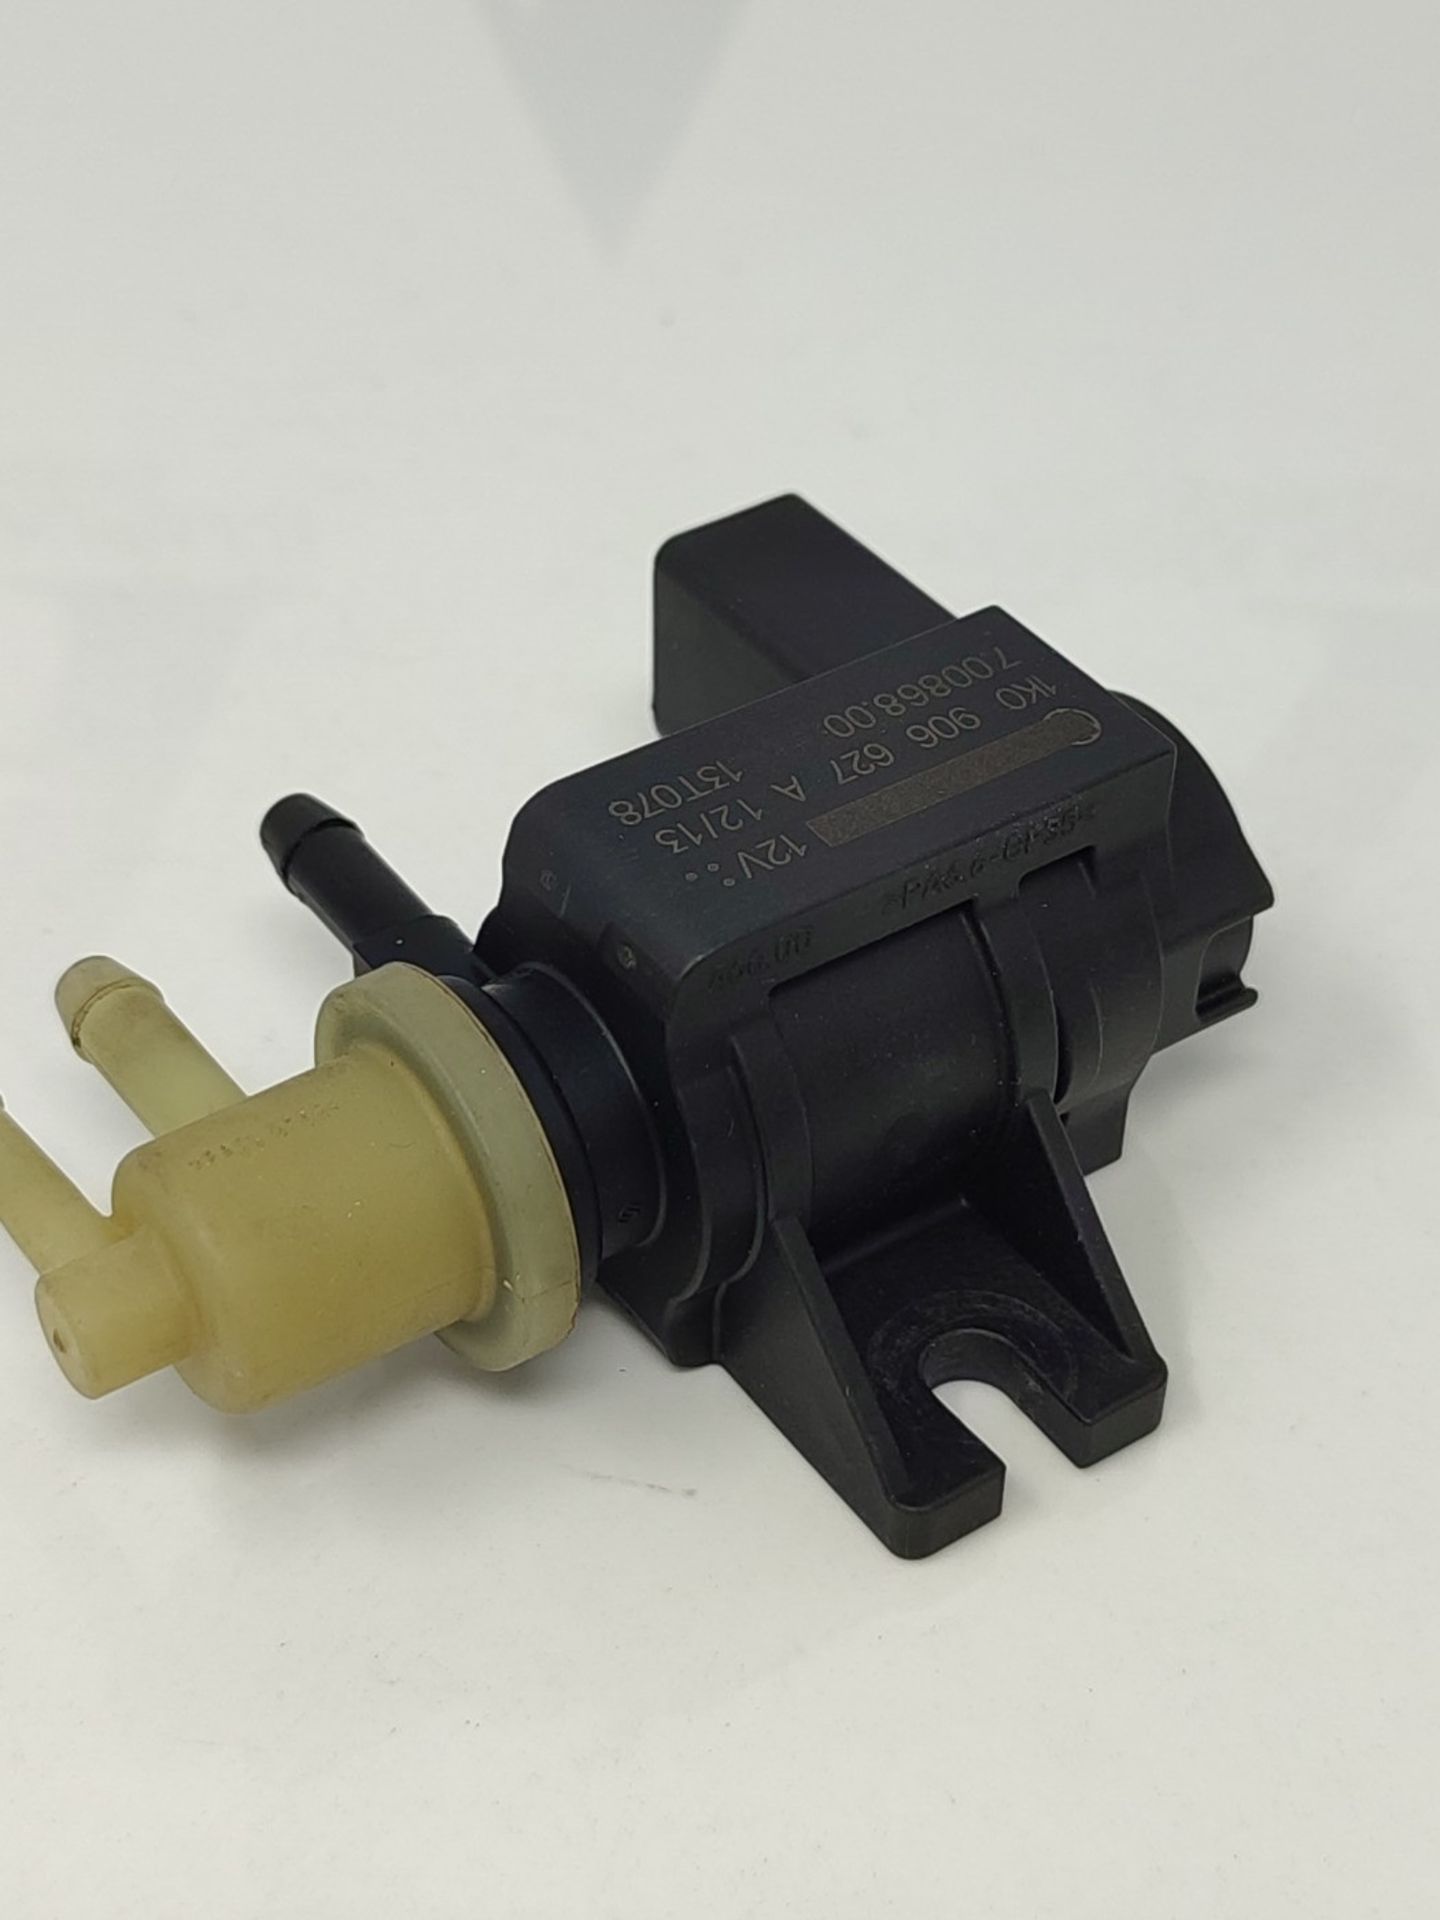 Amrxuts 1K0906627A Turbo Boost Pressure Control Solenoid Valve fits for Audi A3 for A4 - Image 3 of 3